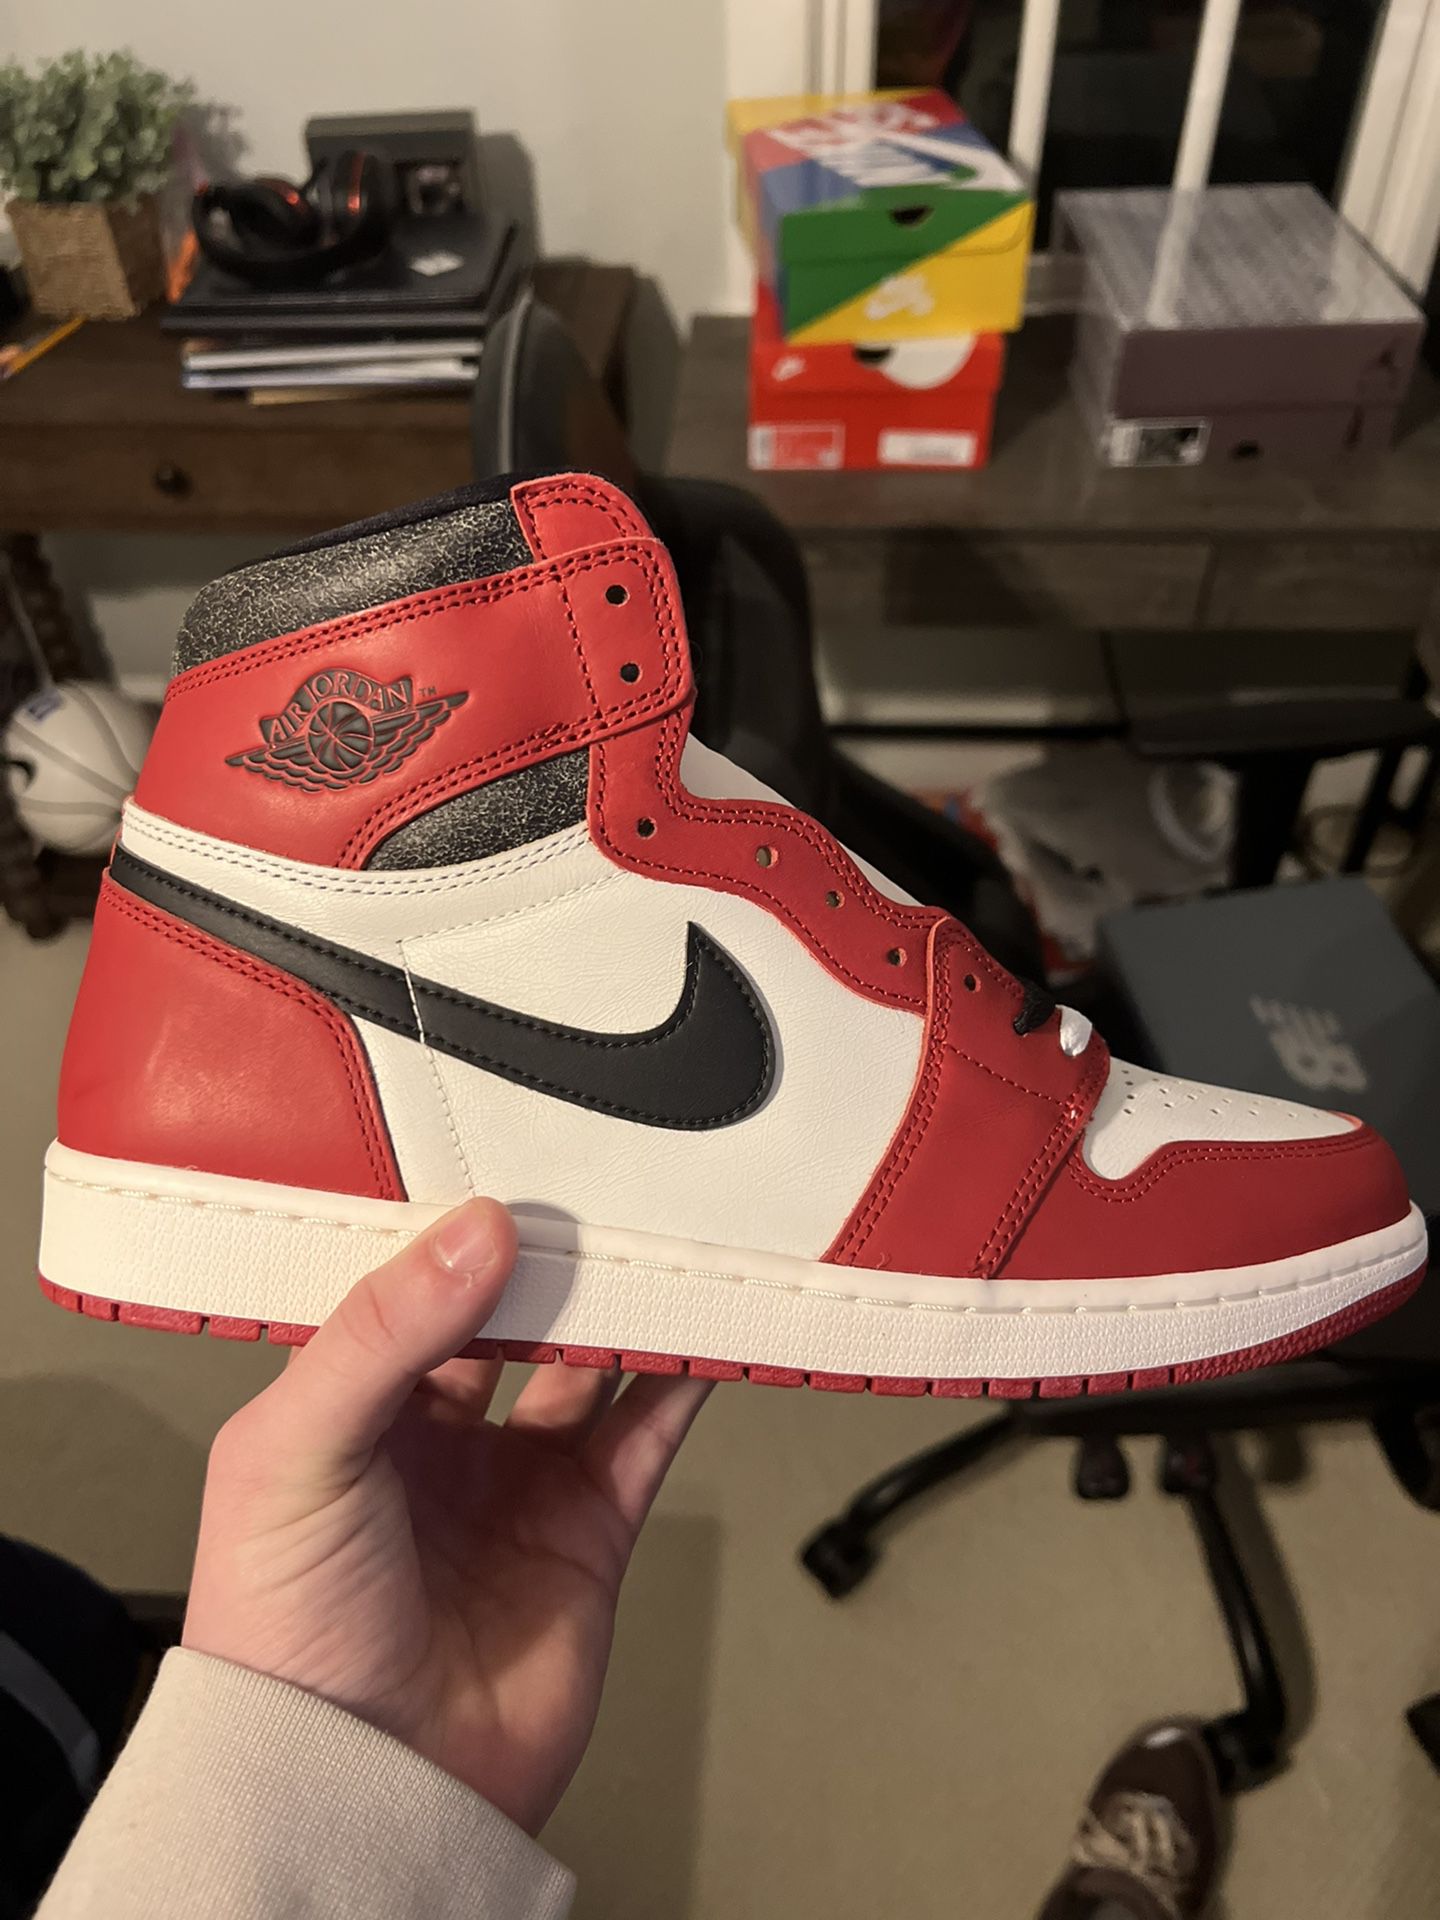 Jordan 1 Lost And Found Size 12